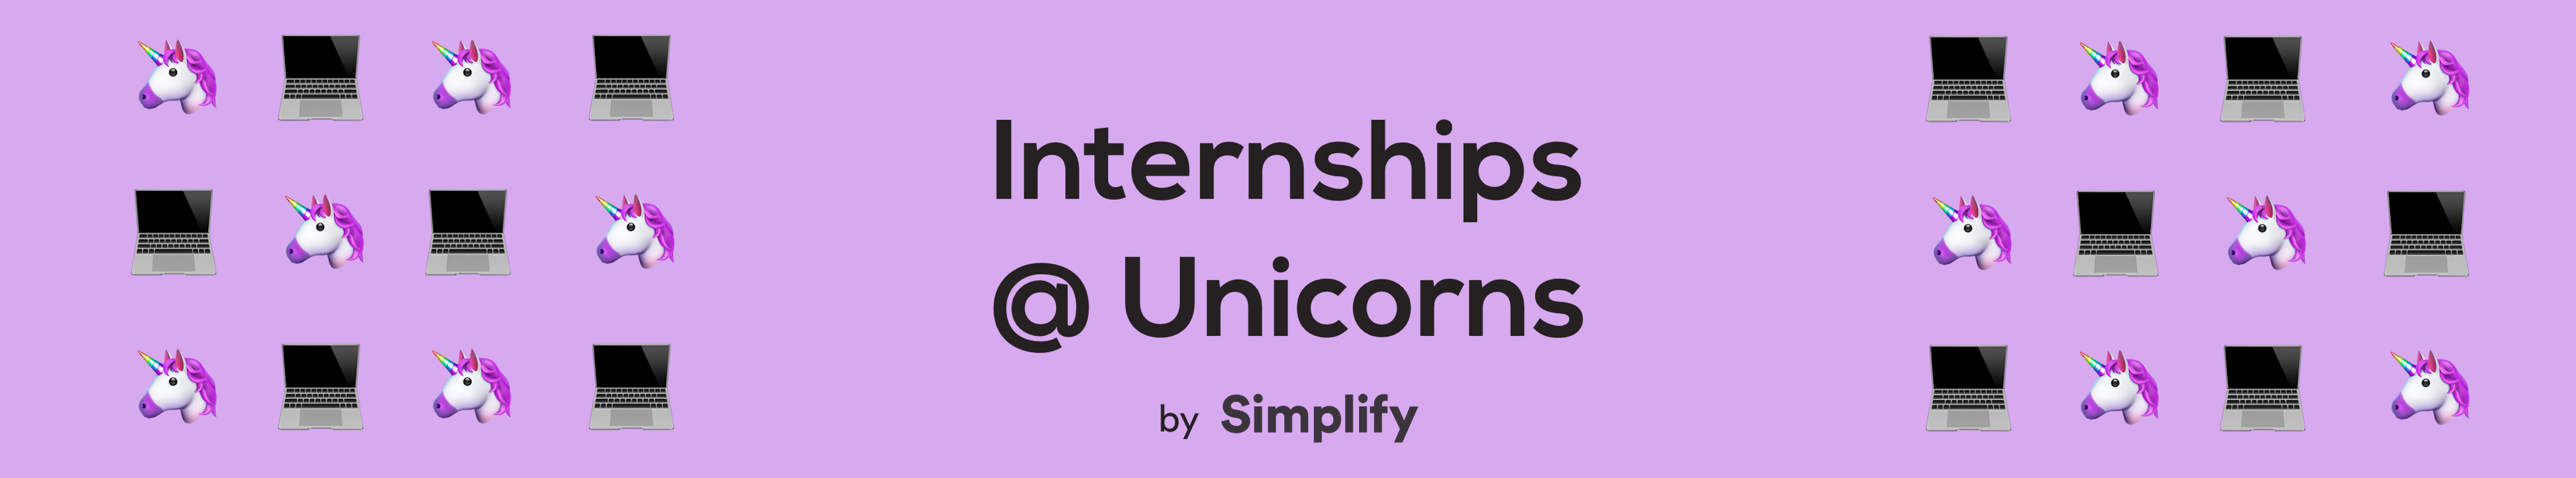 text that says “Internships @ Unicorns by Simplify” surrounded by computer and unicorn emojis